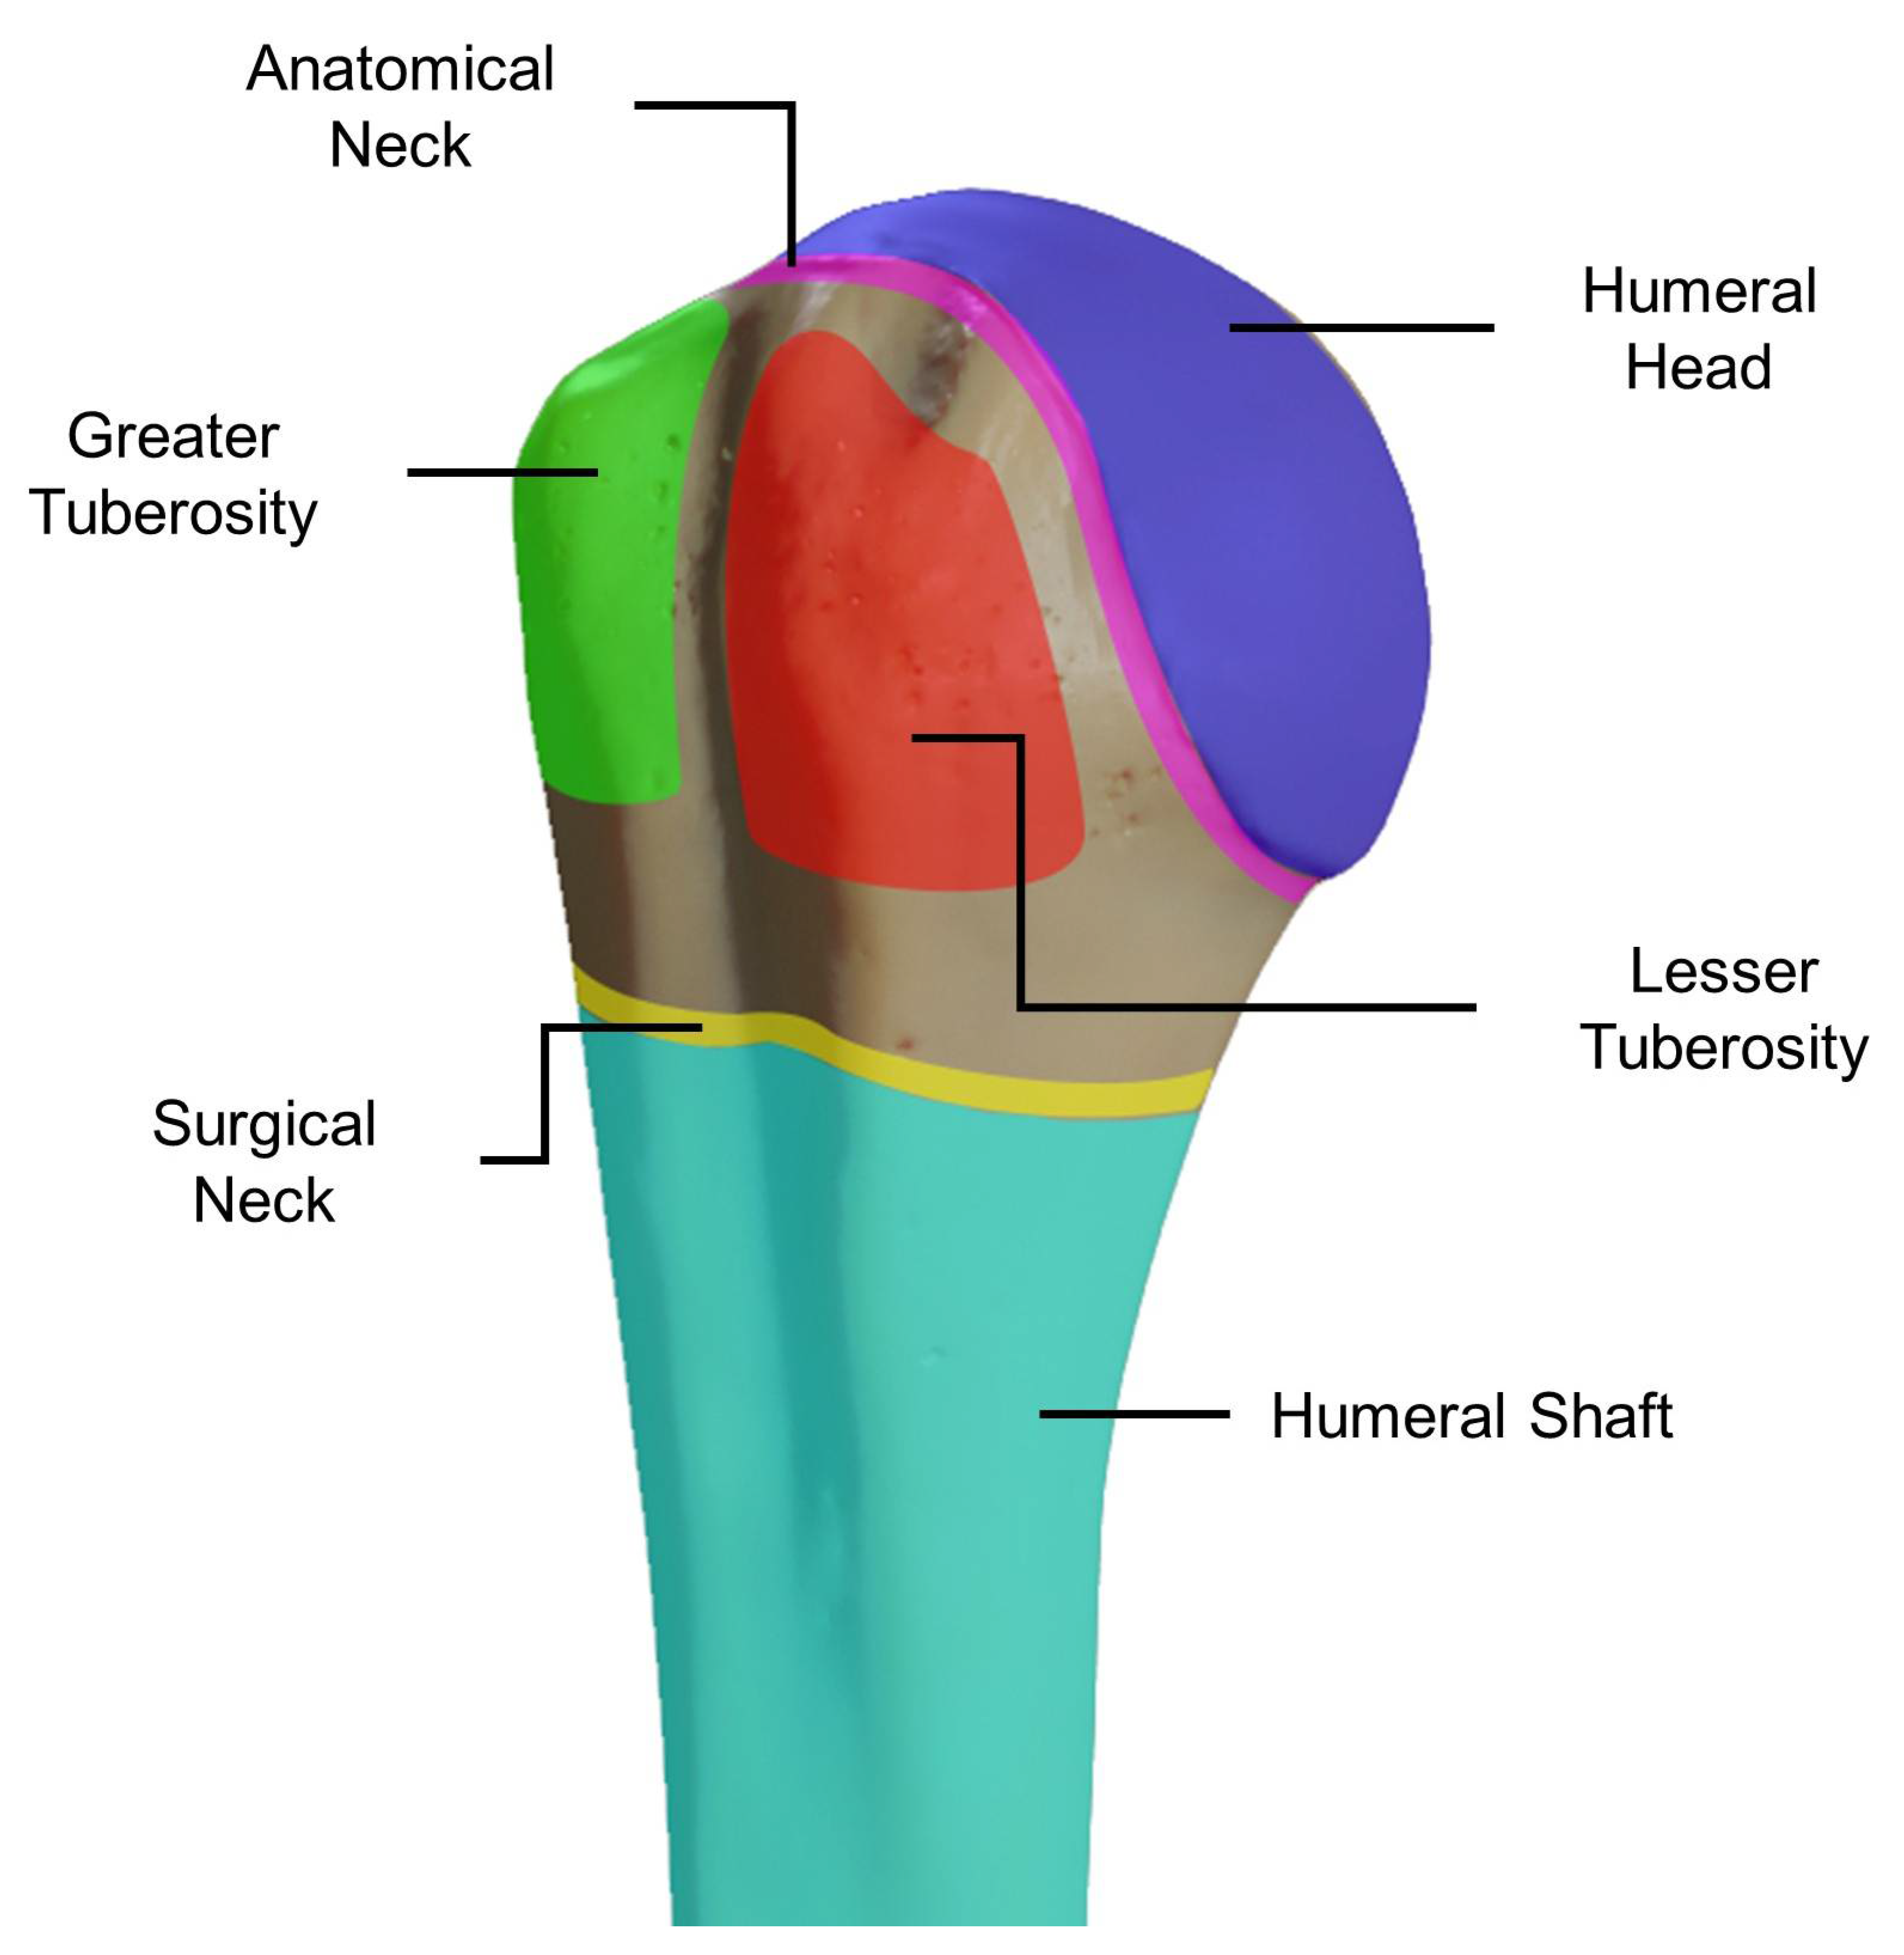 Surgical neck of the humerus - Wikipedia